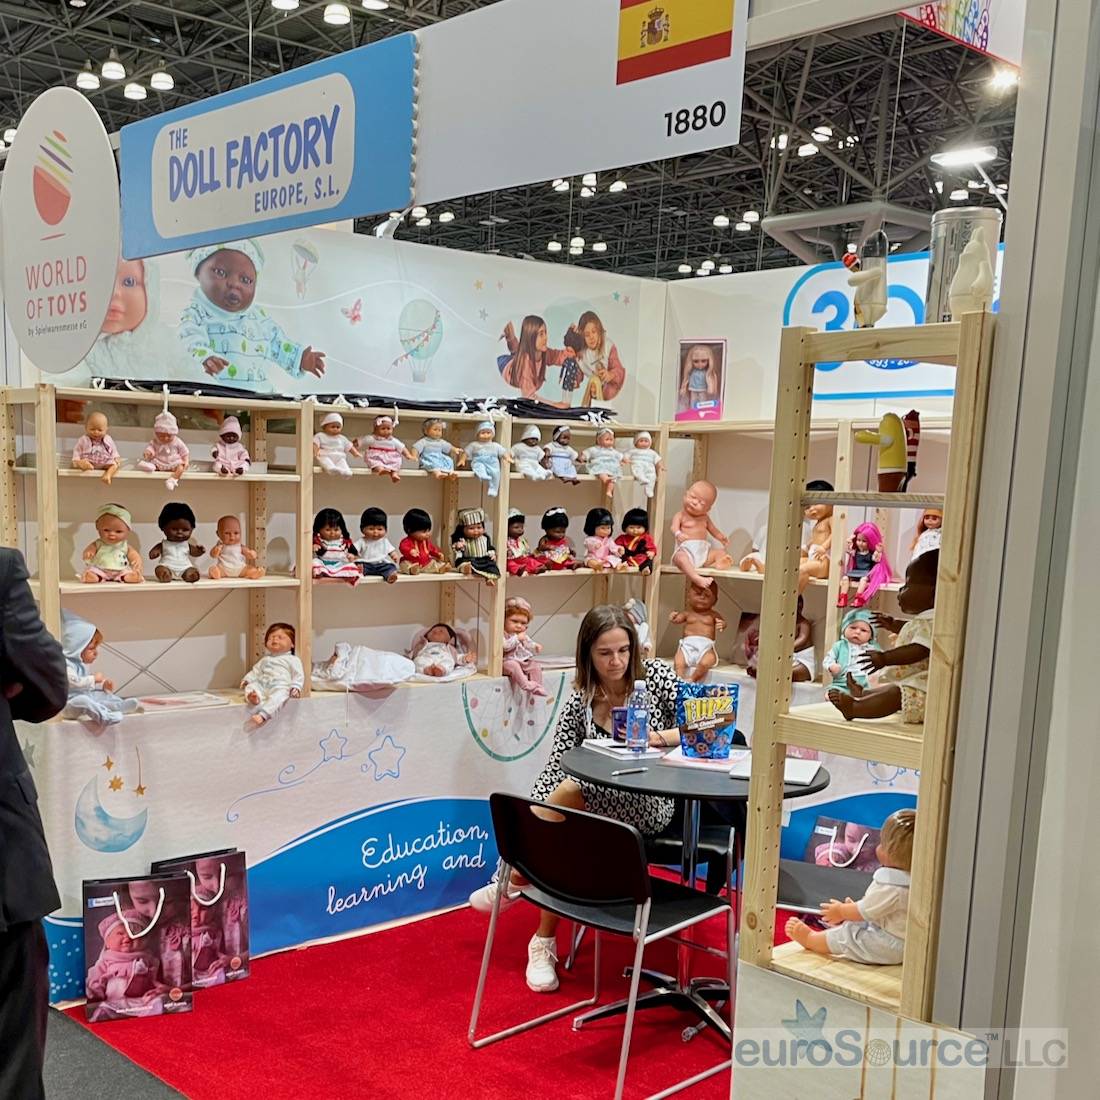 The Doll Factory Europe booth.